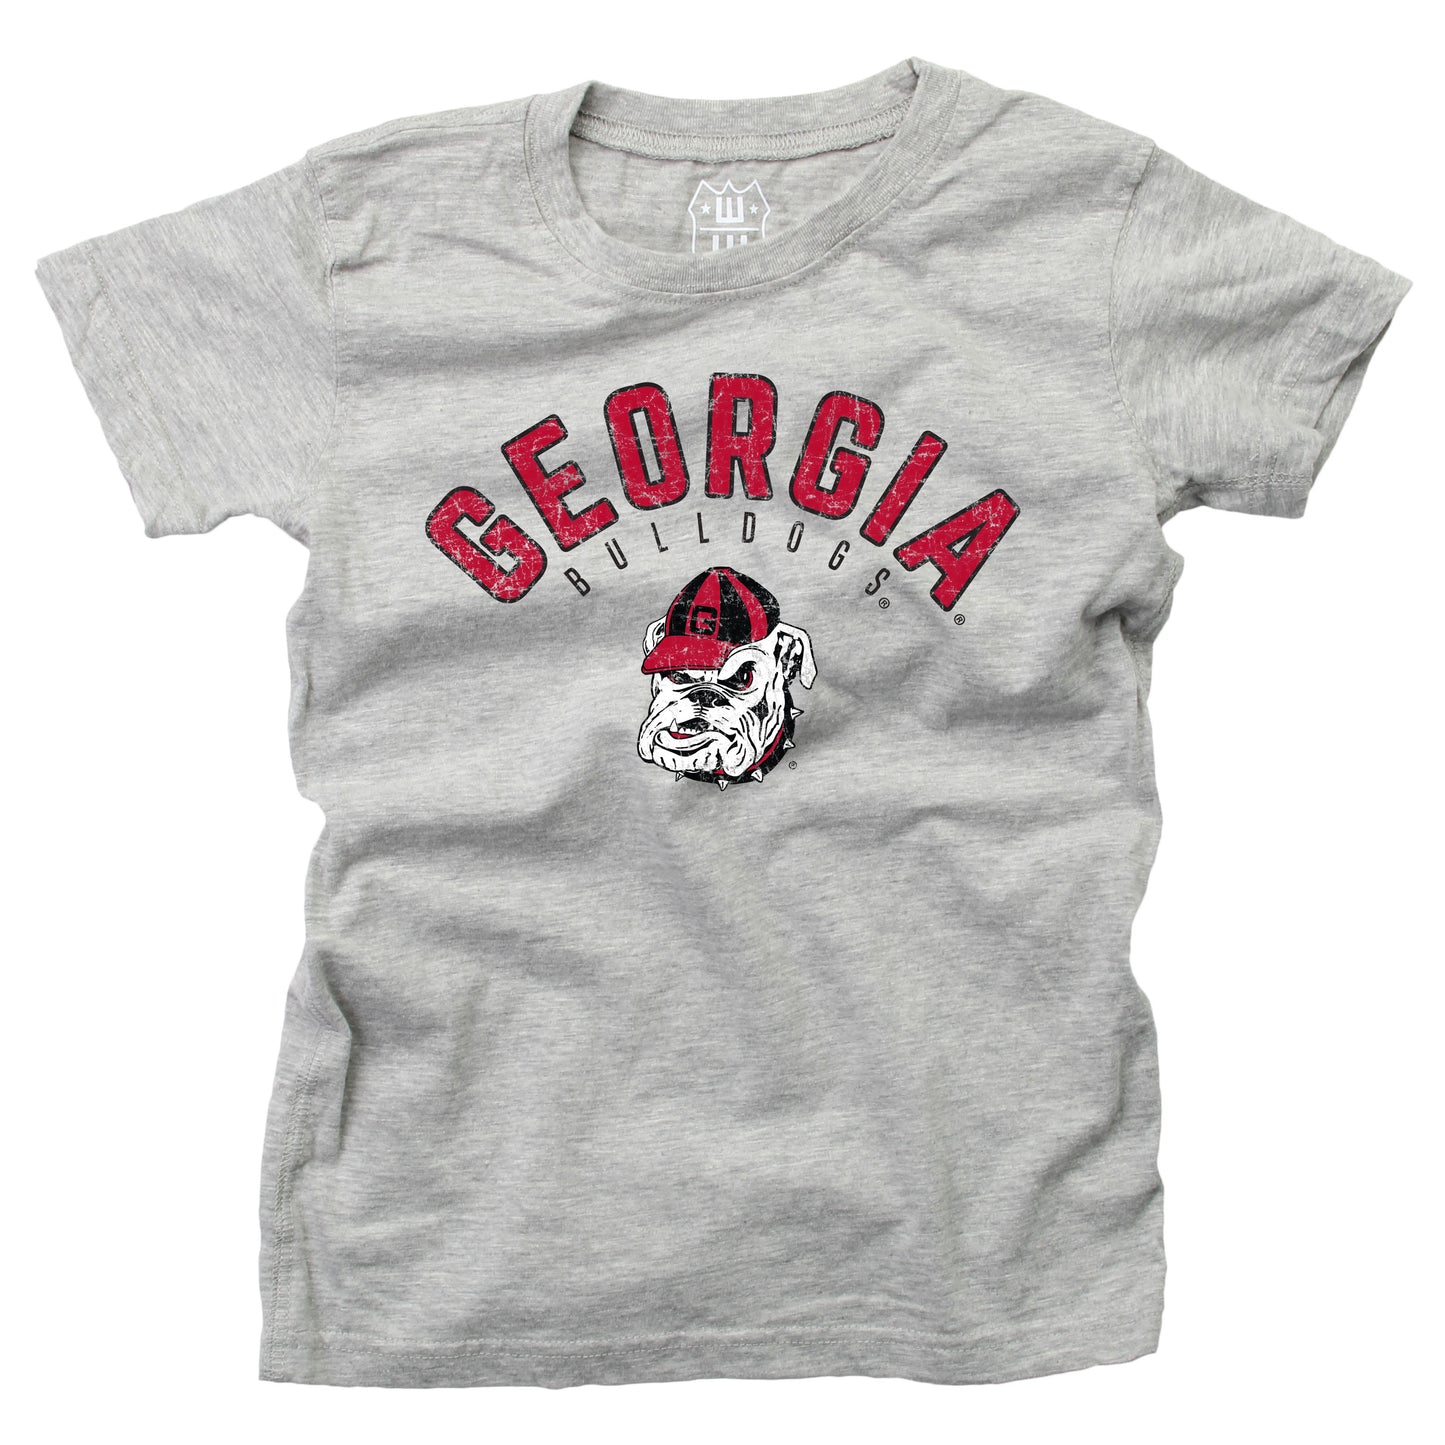 UGA Wes and Willy Girls Loose Fit Tri Blend Tee